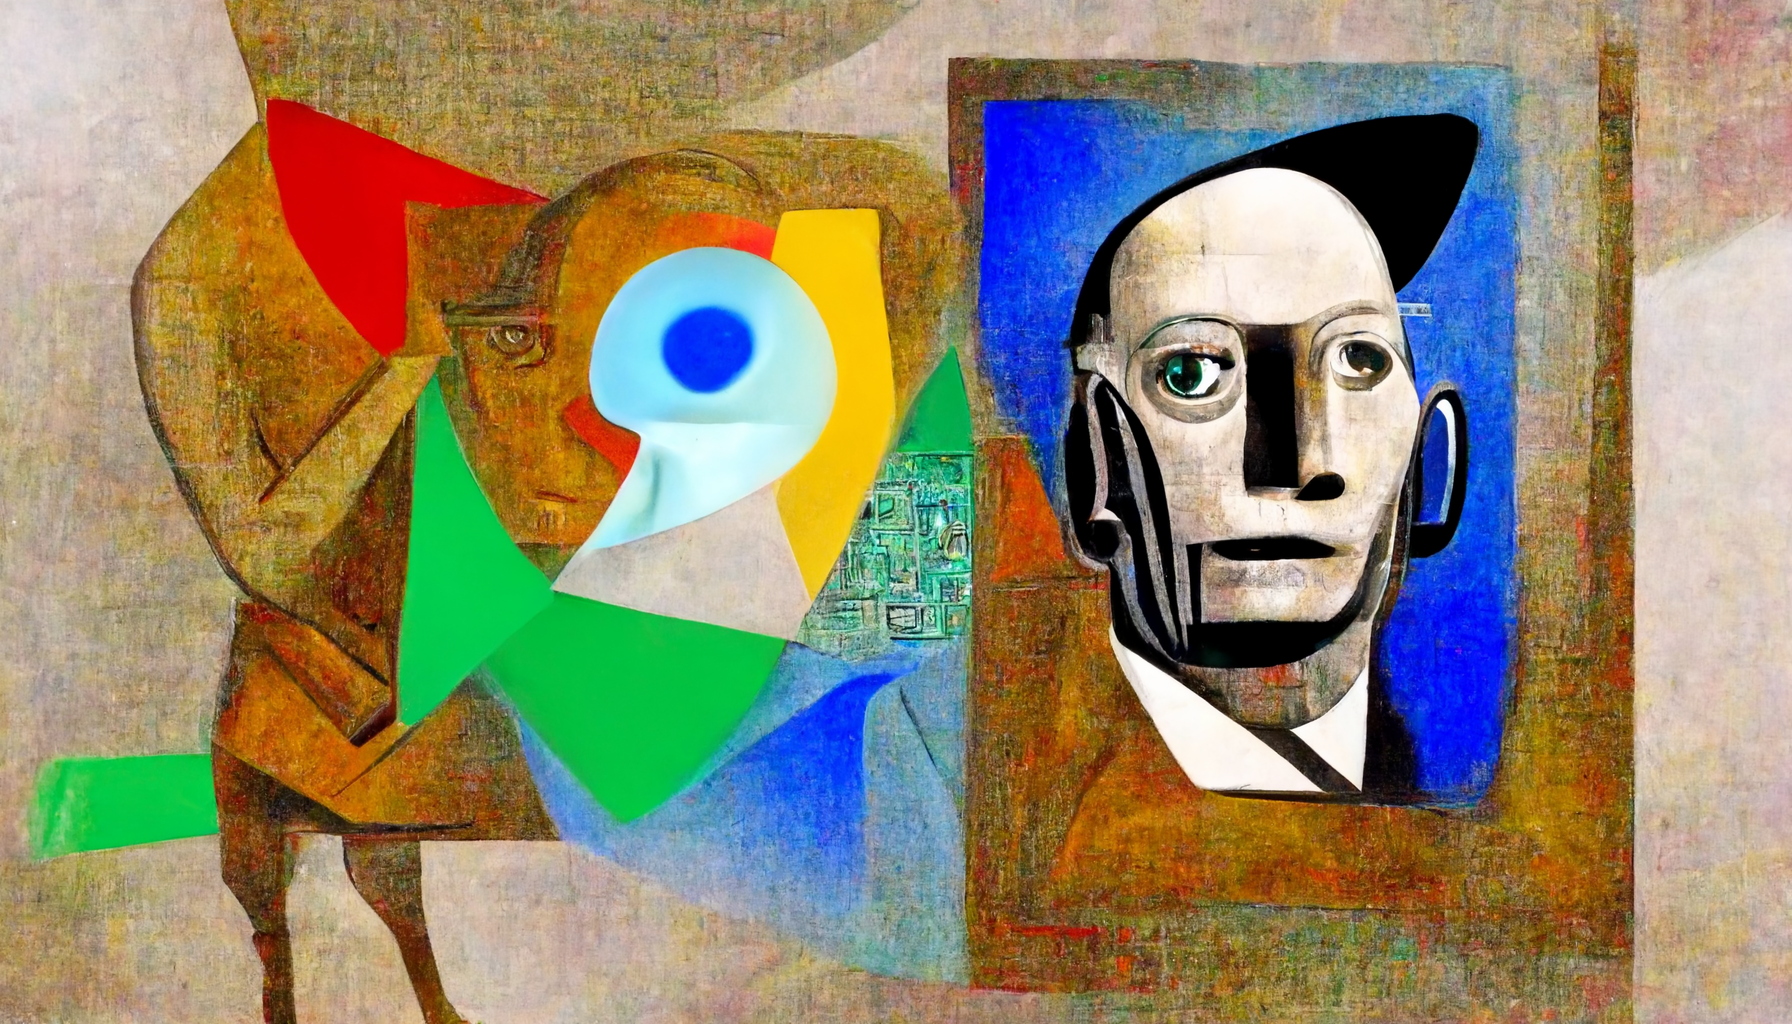 Artificial intelligence becoming self-aware, Picasso futurism (Midjourney)